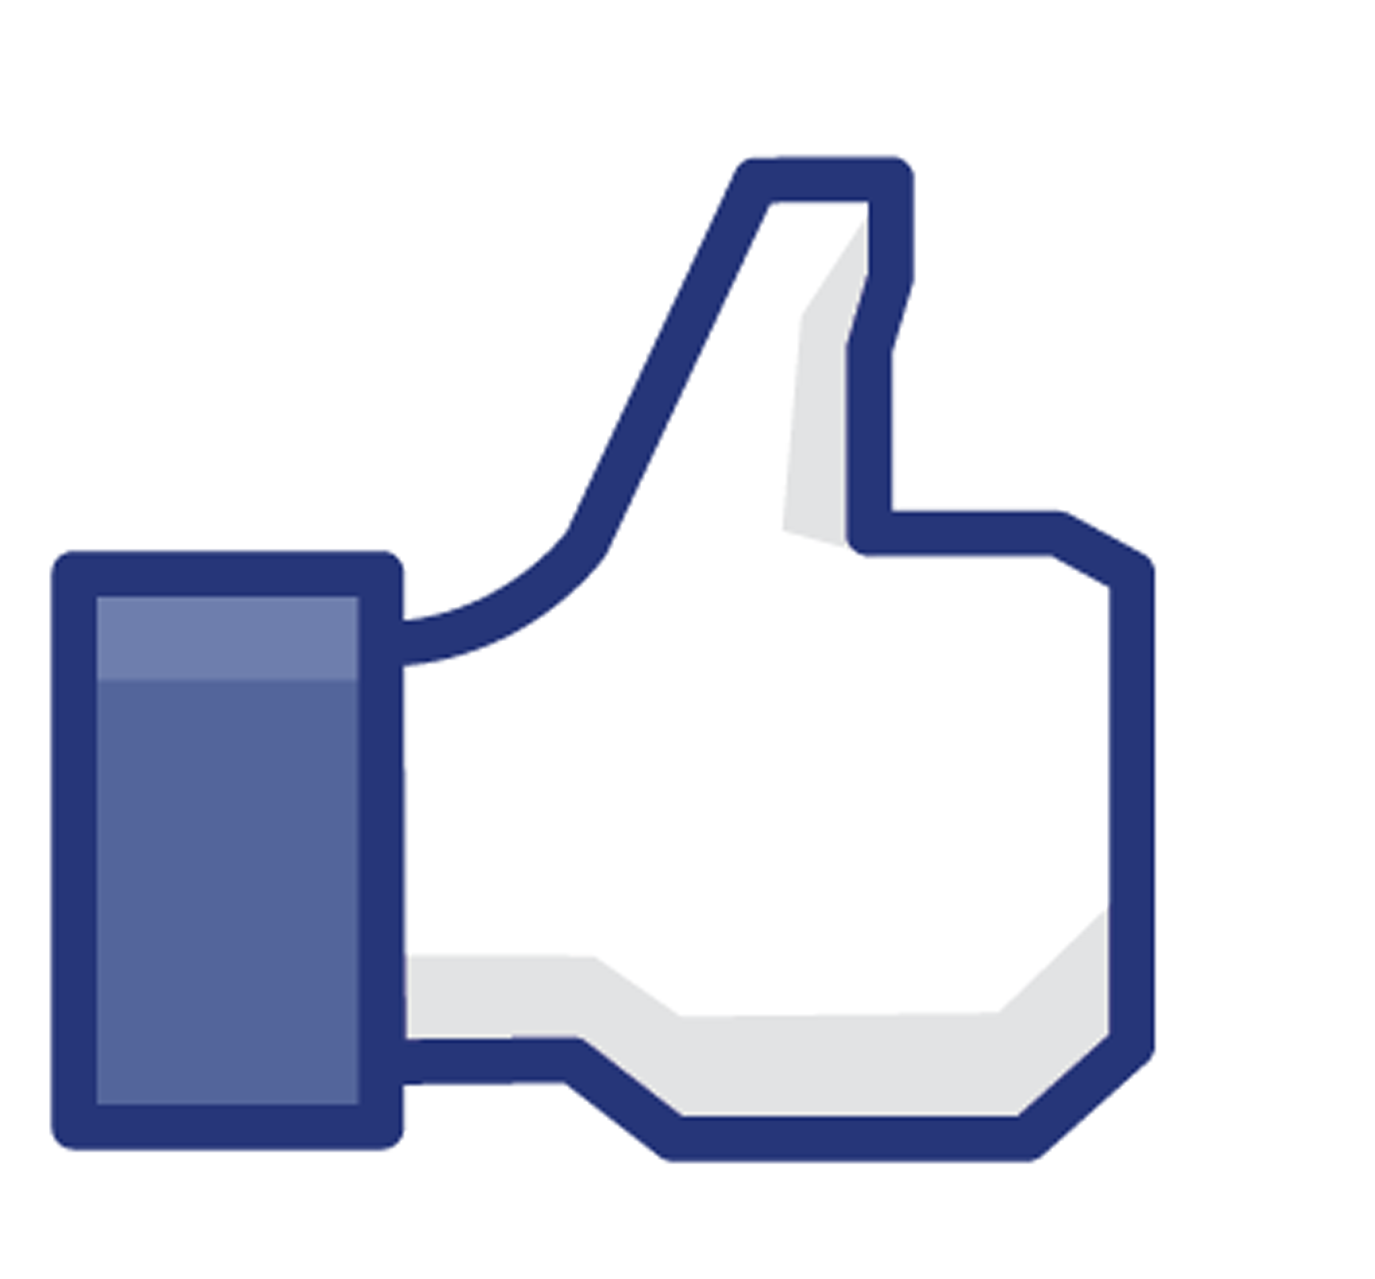 Facebook-like-icon.png